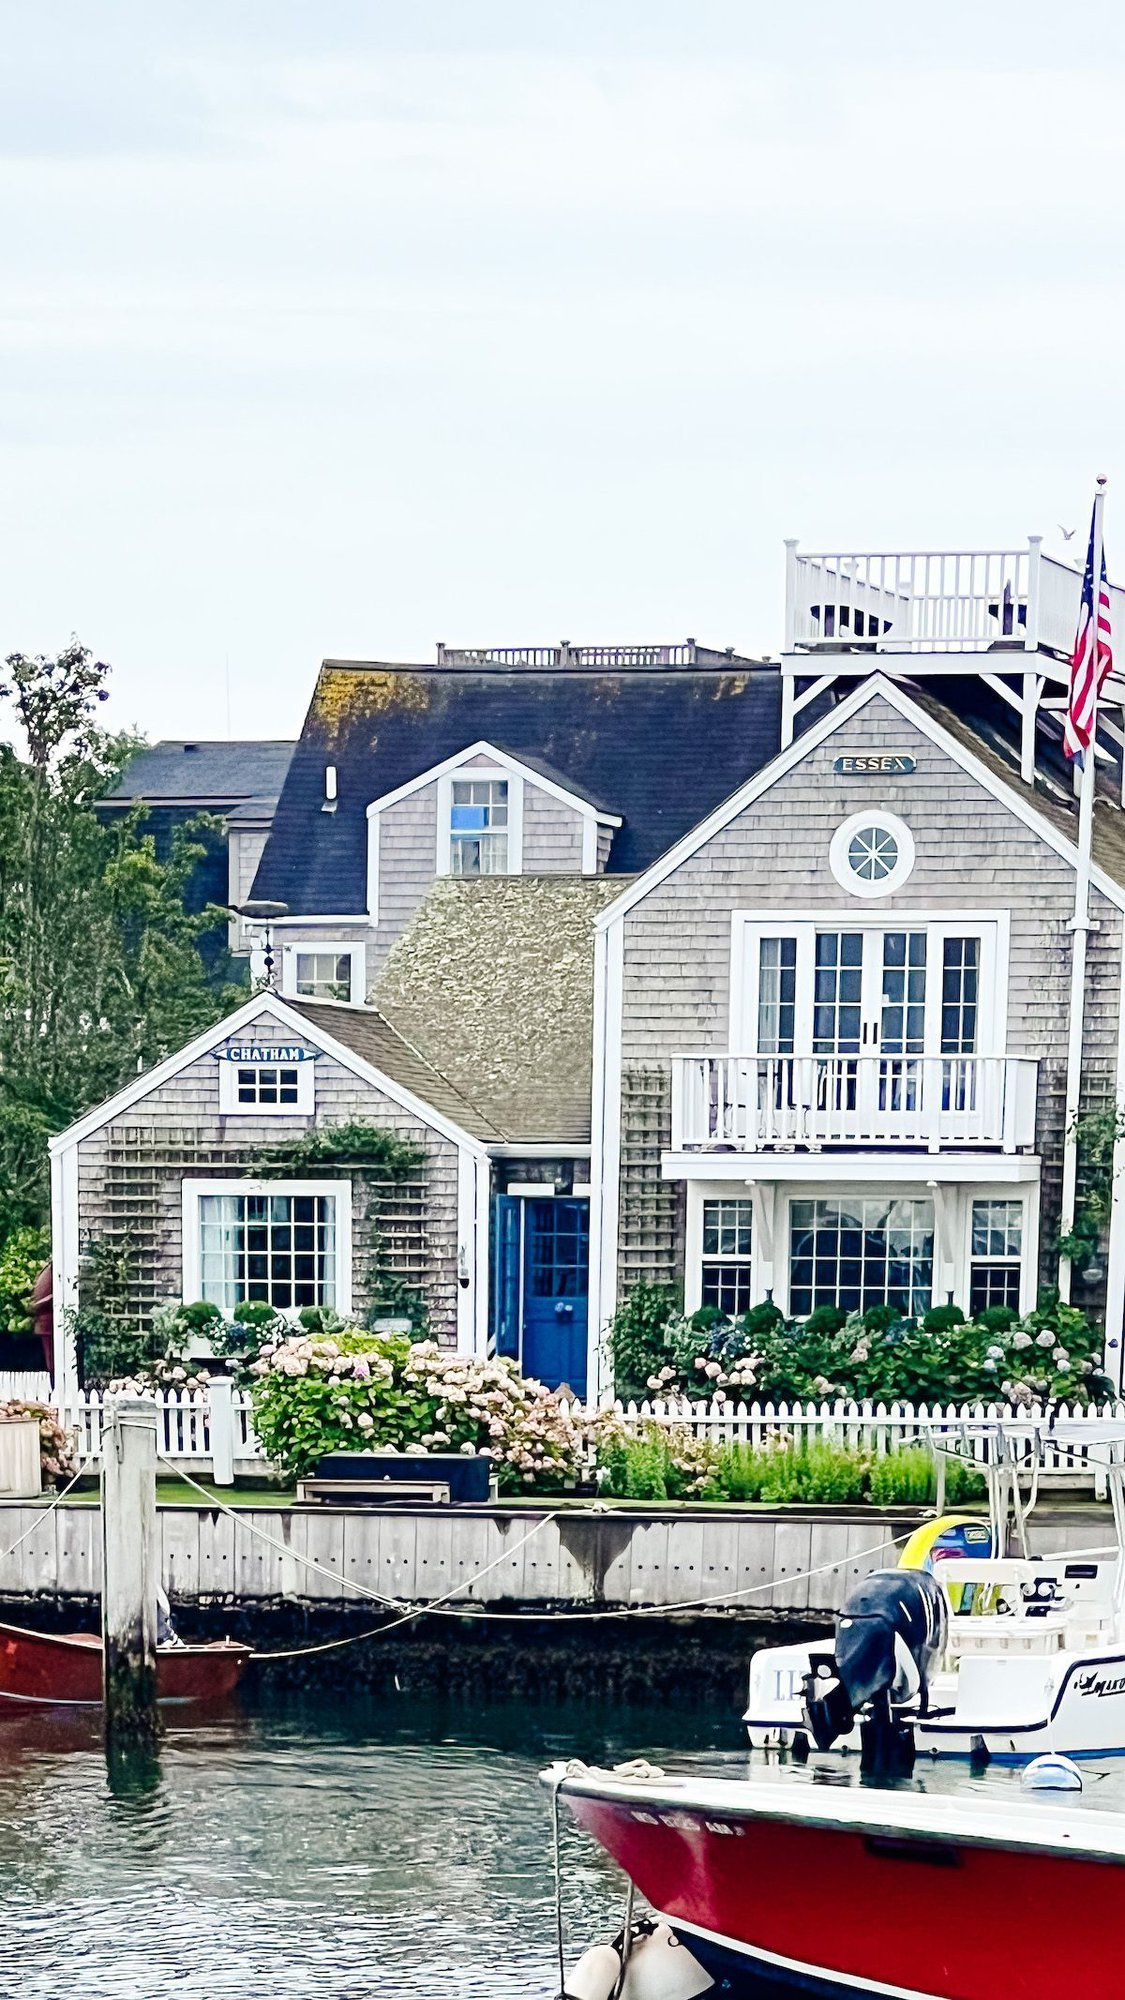 A shingled cottage on Nantucket, with faded hydrangeas and a blue door